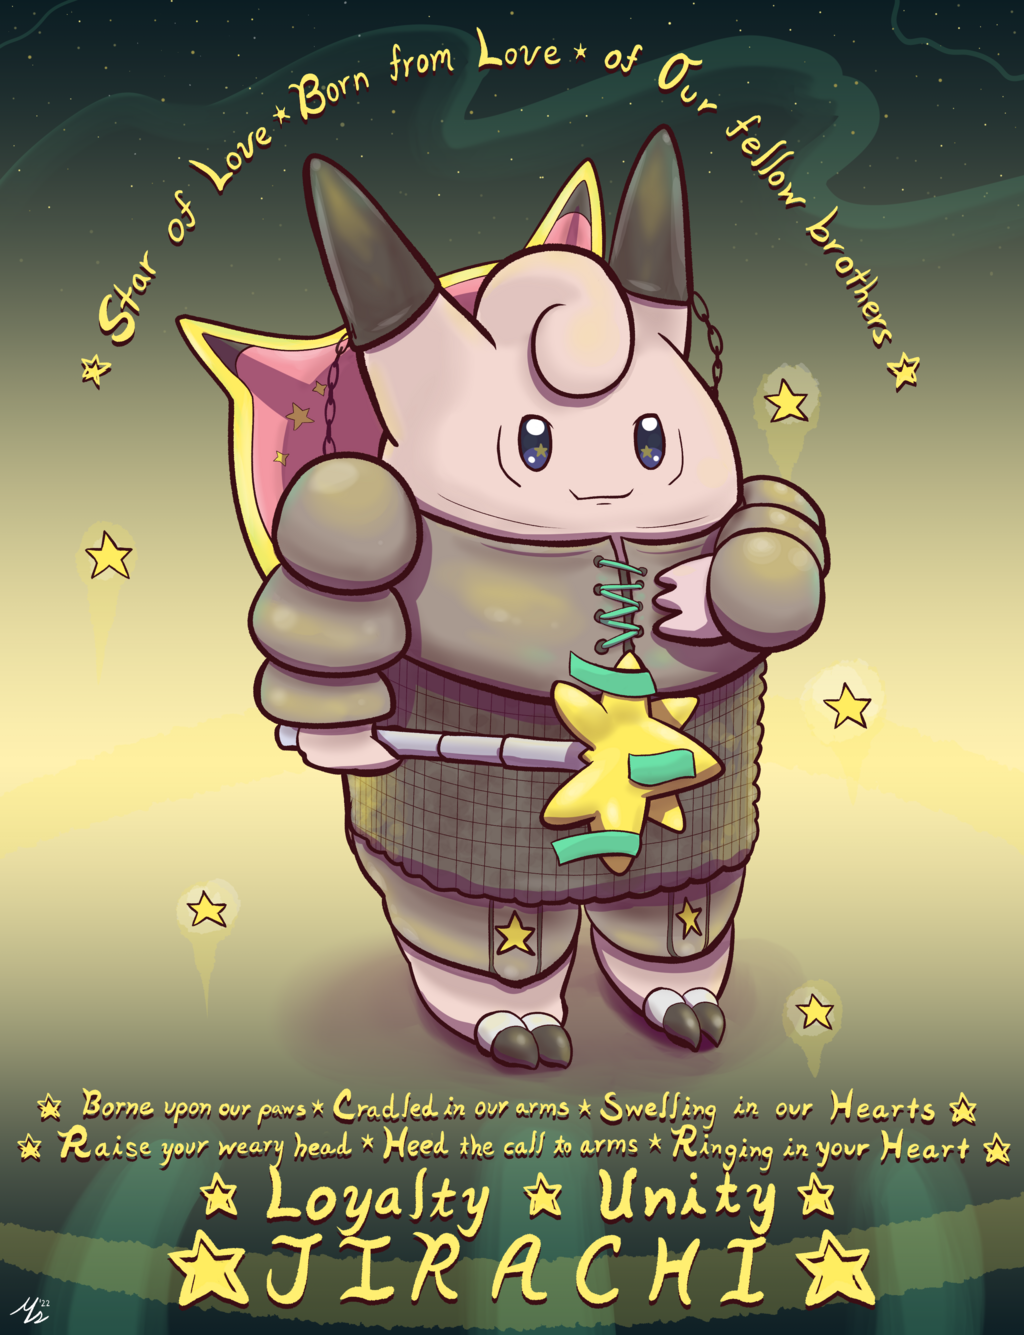 Clefable Paladin for Jirachi